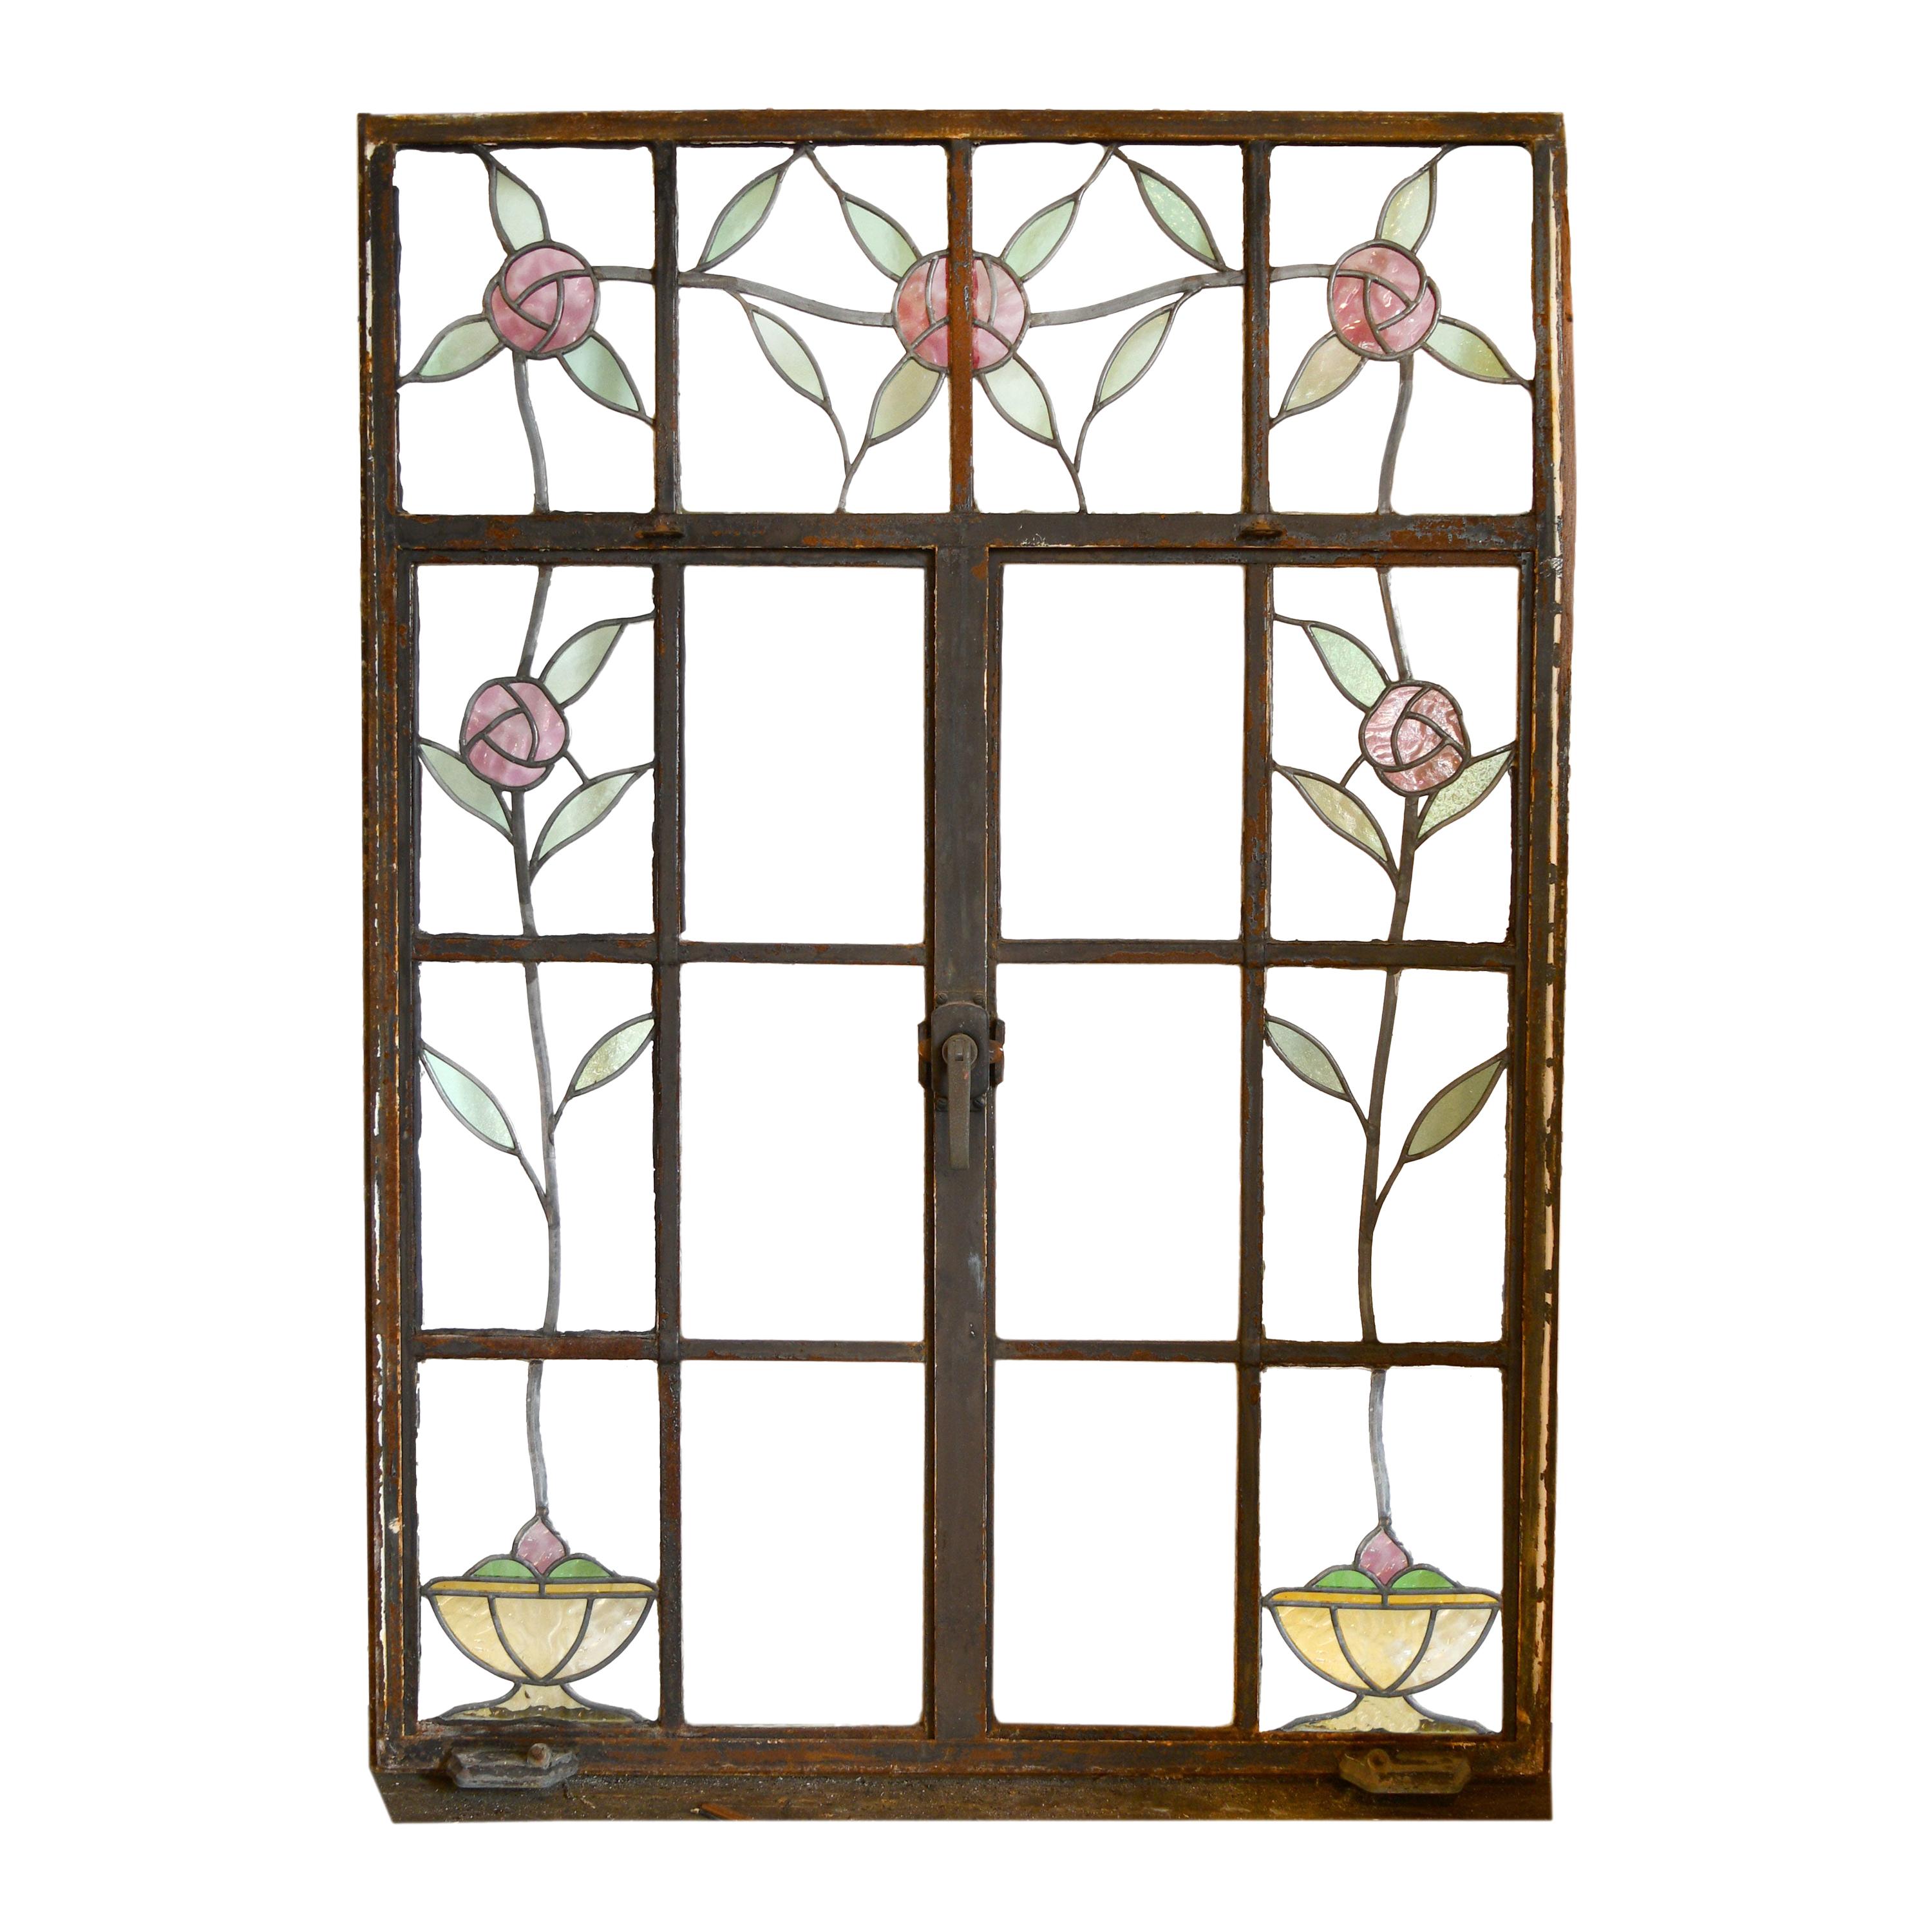 Medium Casement Window with Stained Glass Roses